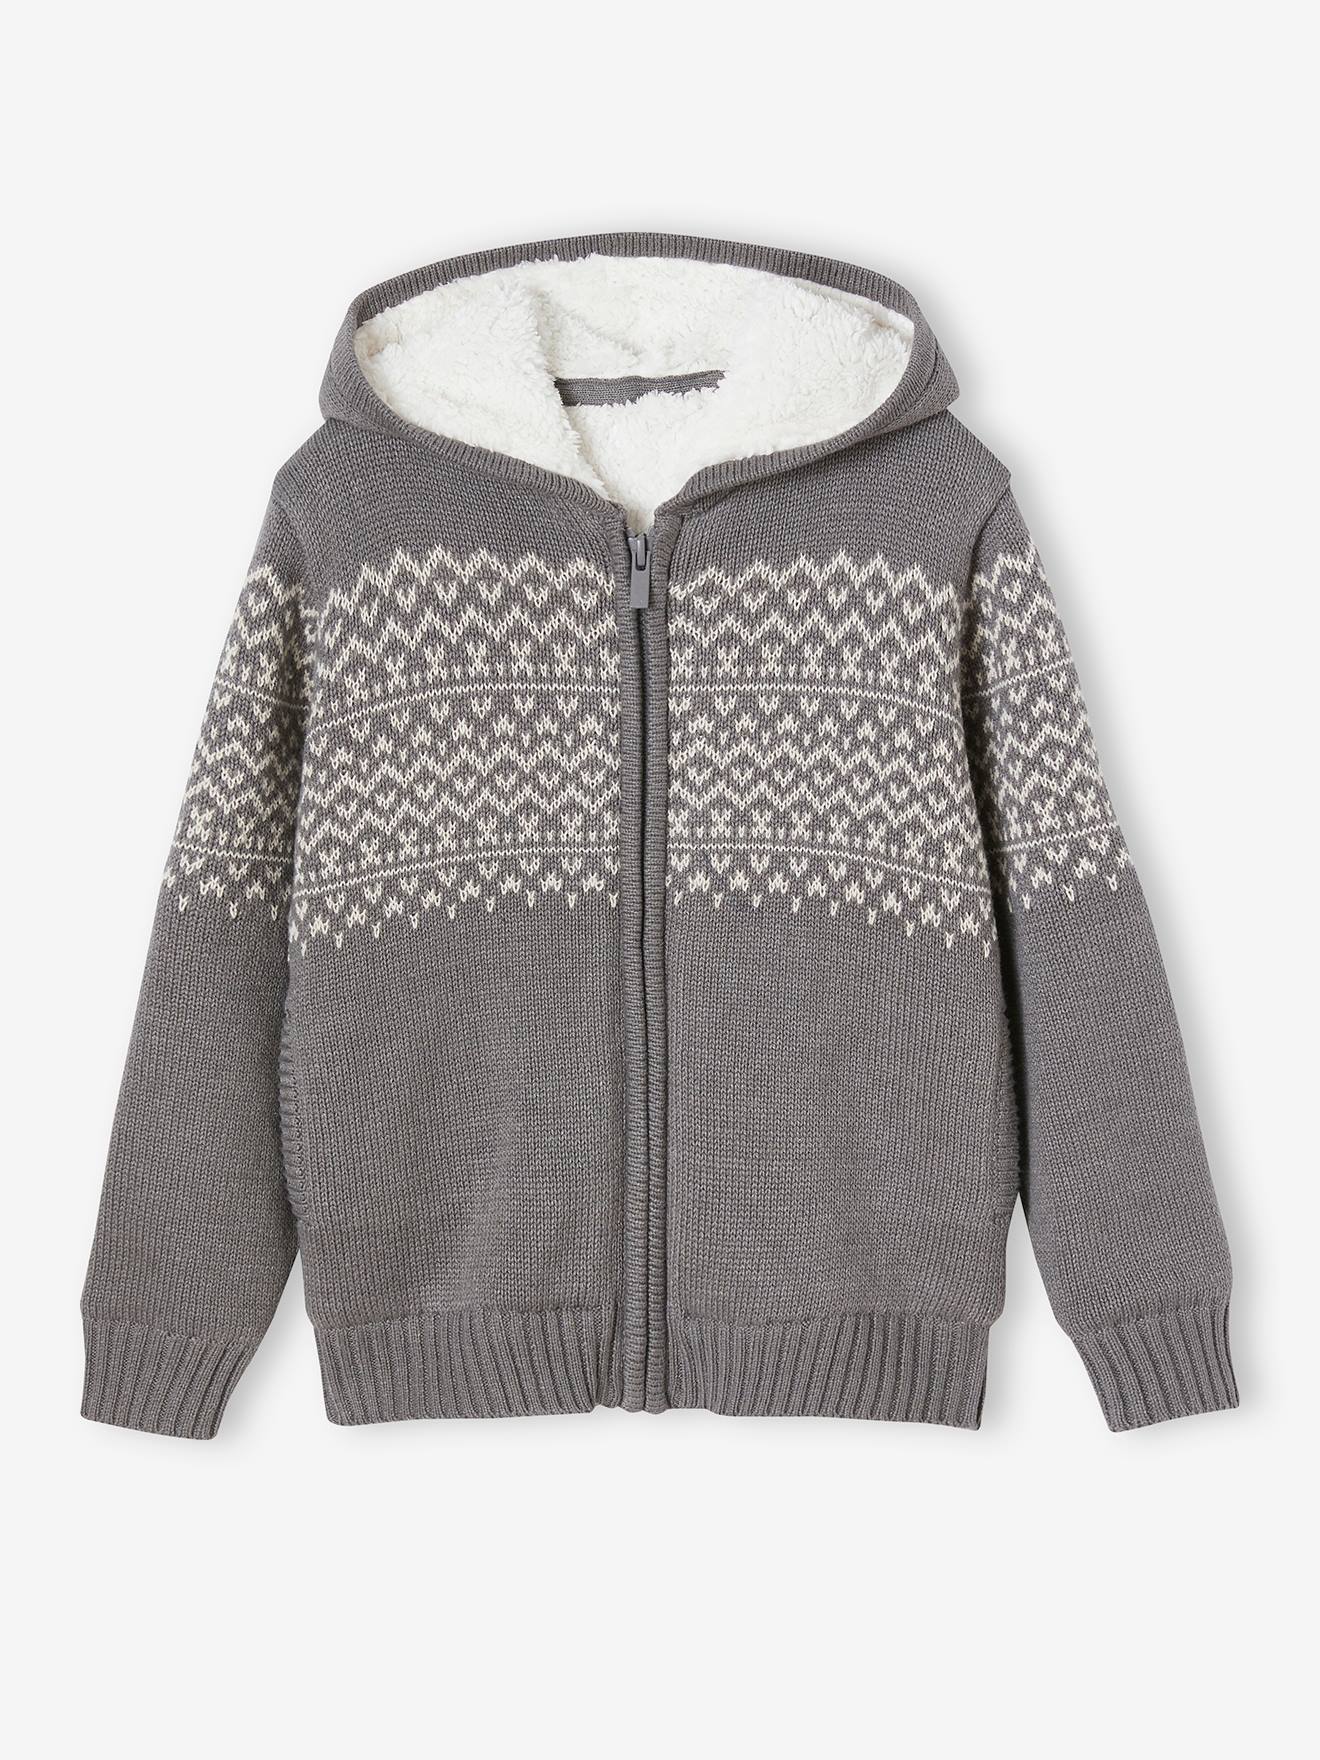 Zipped Jacket with Hood, Sherpa Lining, For Boys marl grey